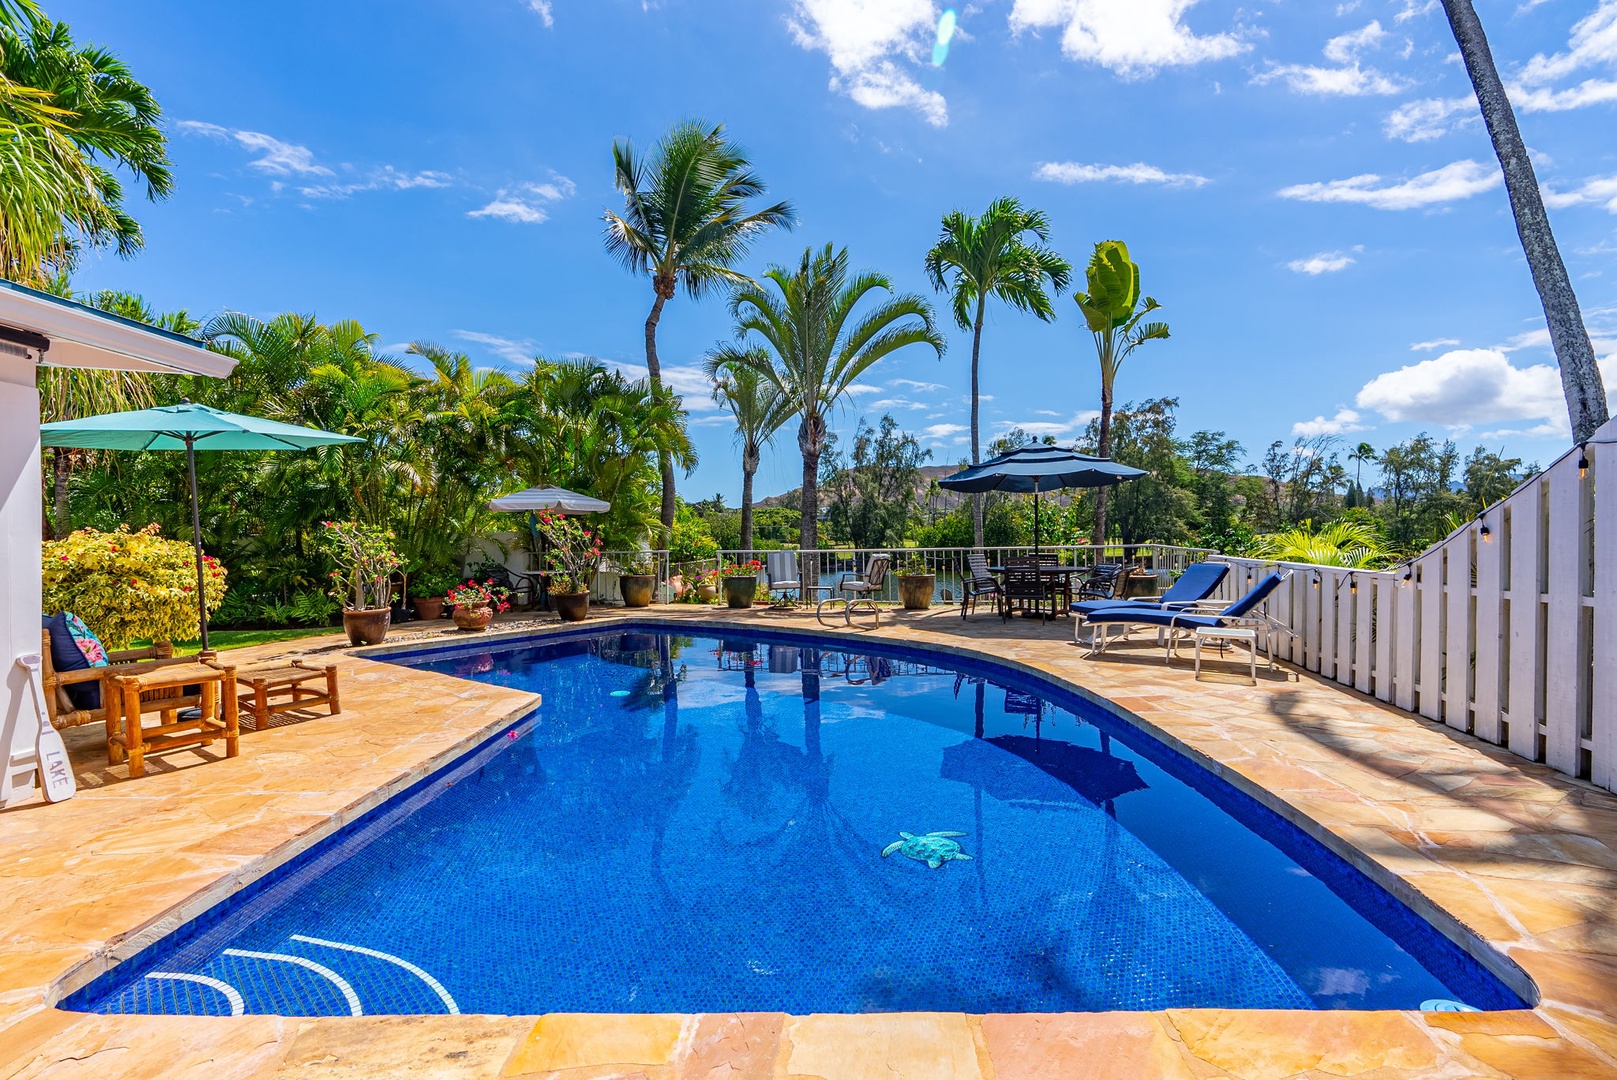 Kailua Vacation Rentals, Hale Aloha - Relax and unwind by the inviting pool, complemented by comfortable chaise lounges.